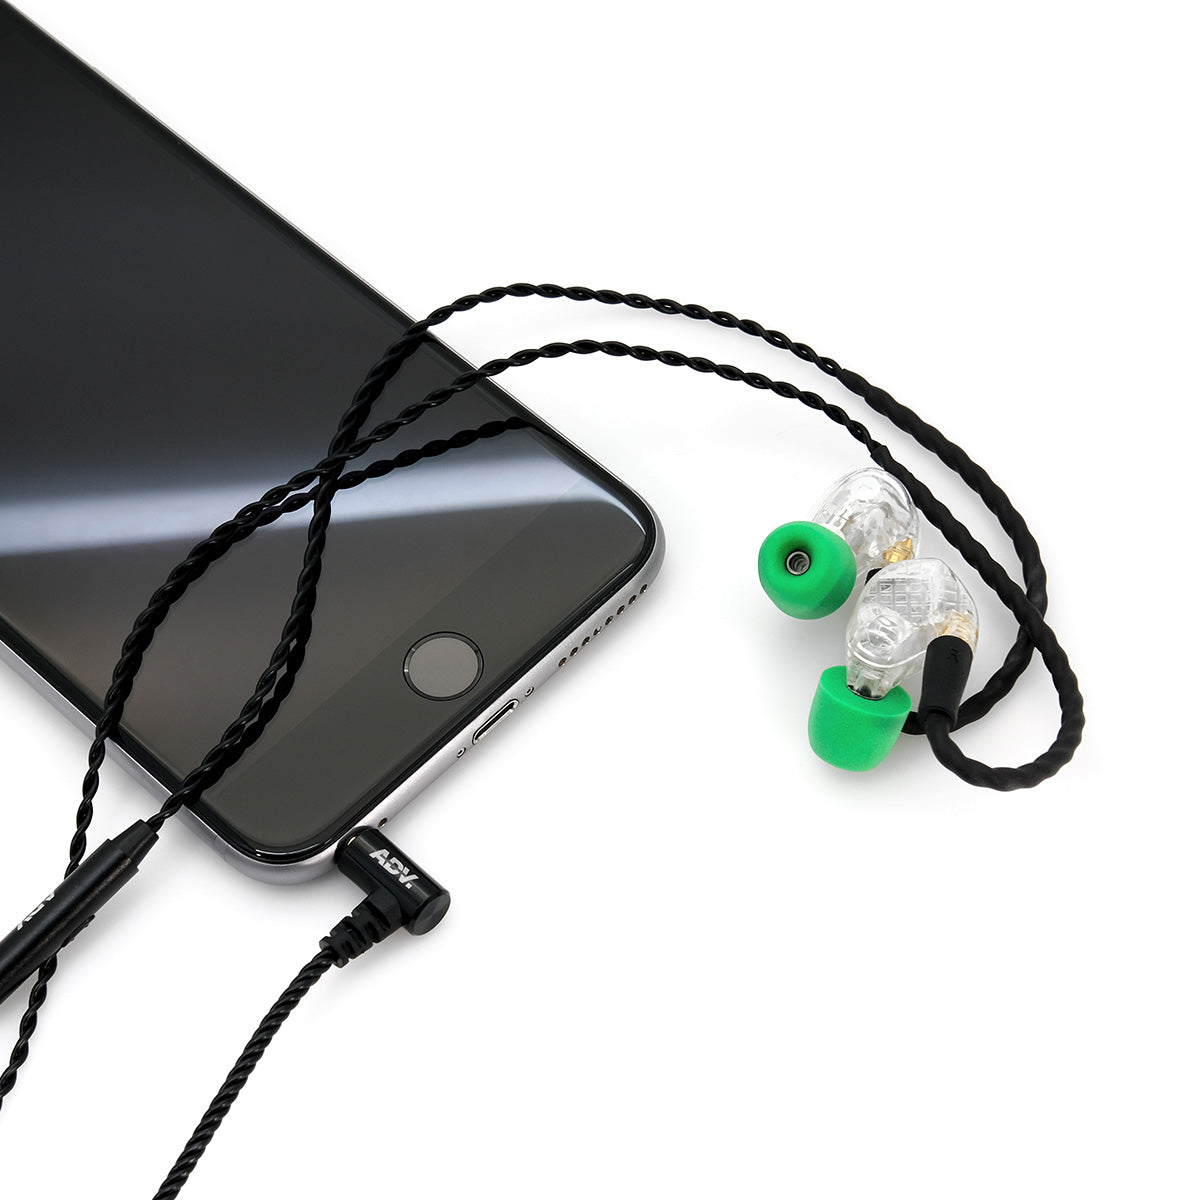 ADV. Model 3 Mobile In-ear Monitor for Musicians and Professionals In-line Microphone and Remote MMCX #edition_mobile